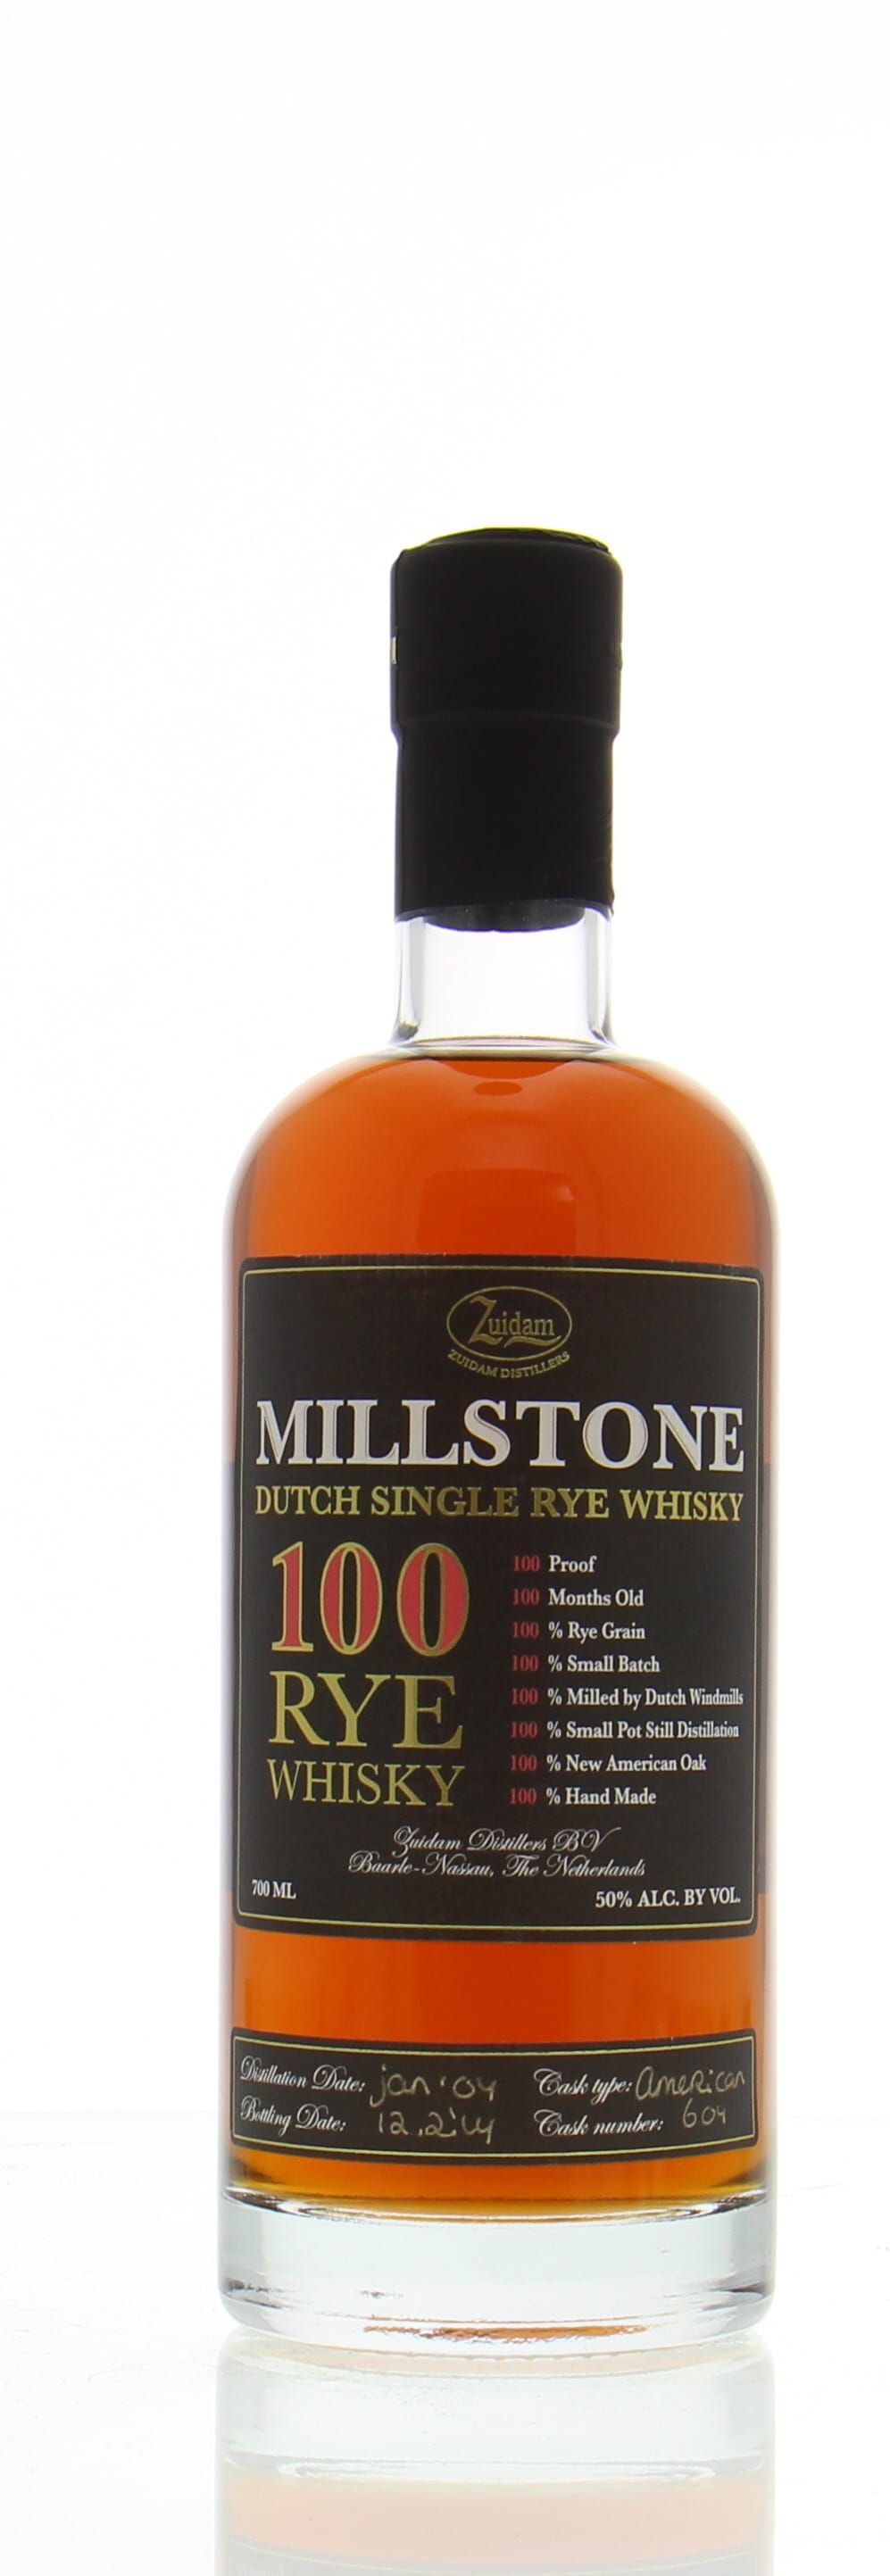 Millstone - 100 Rye Whisky Cask 604 50% 2004 Perfect